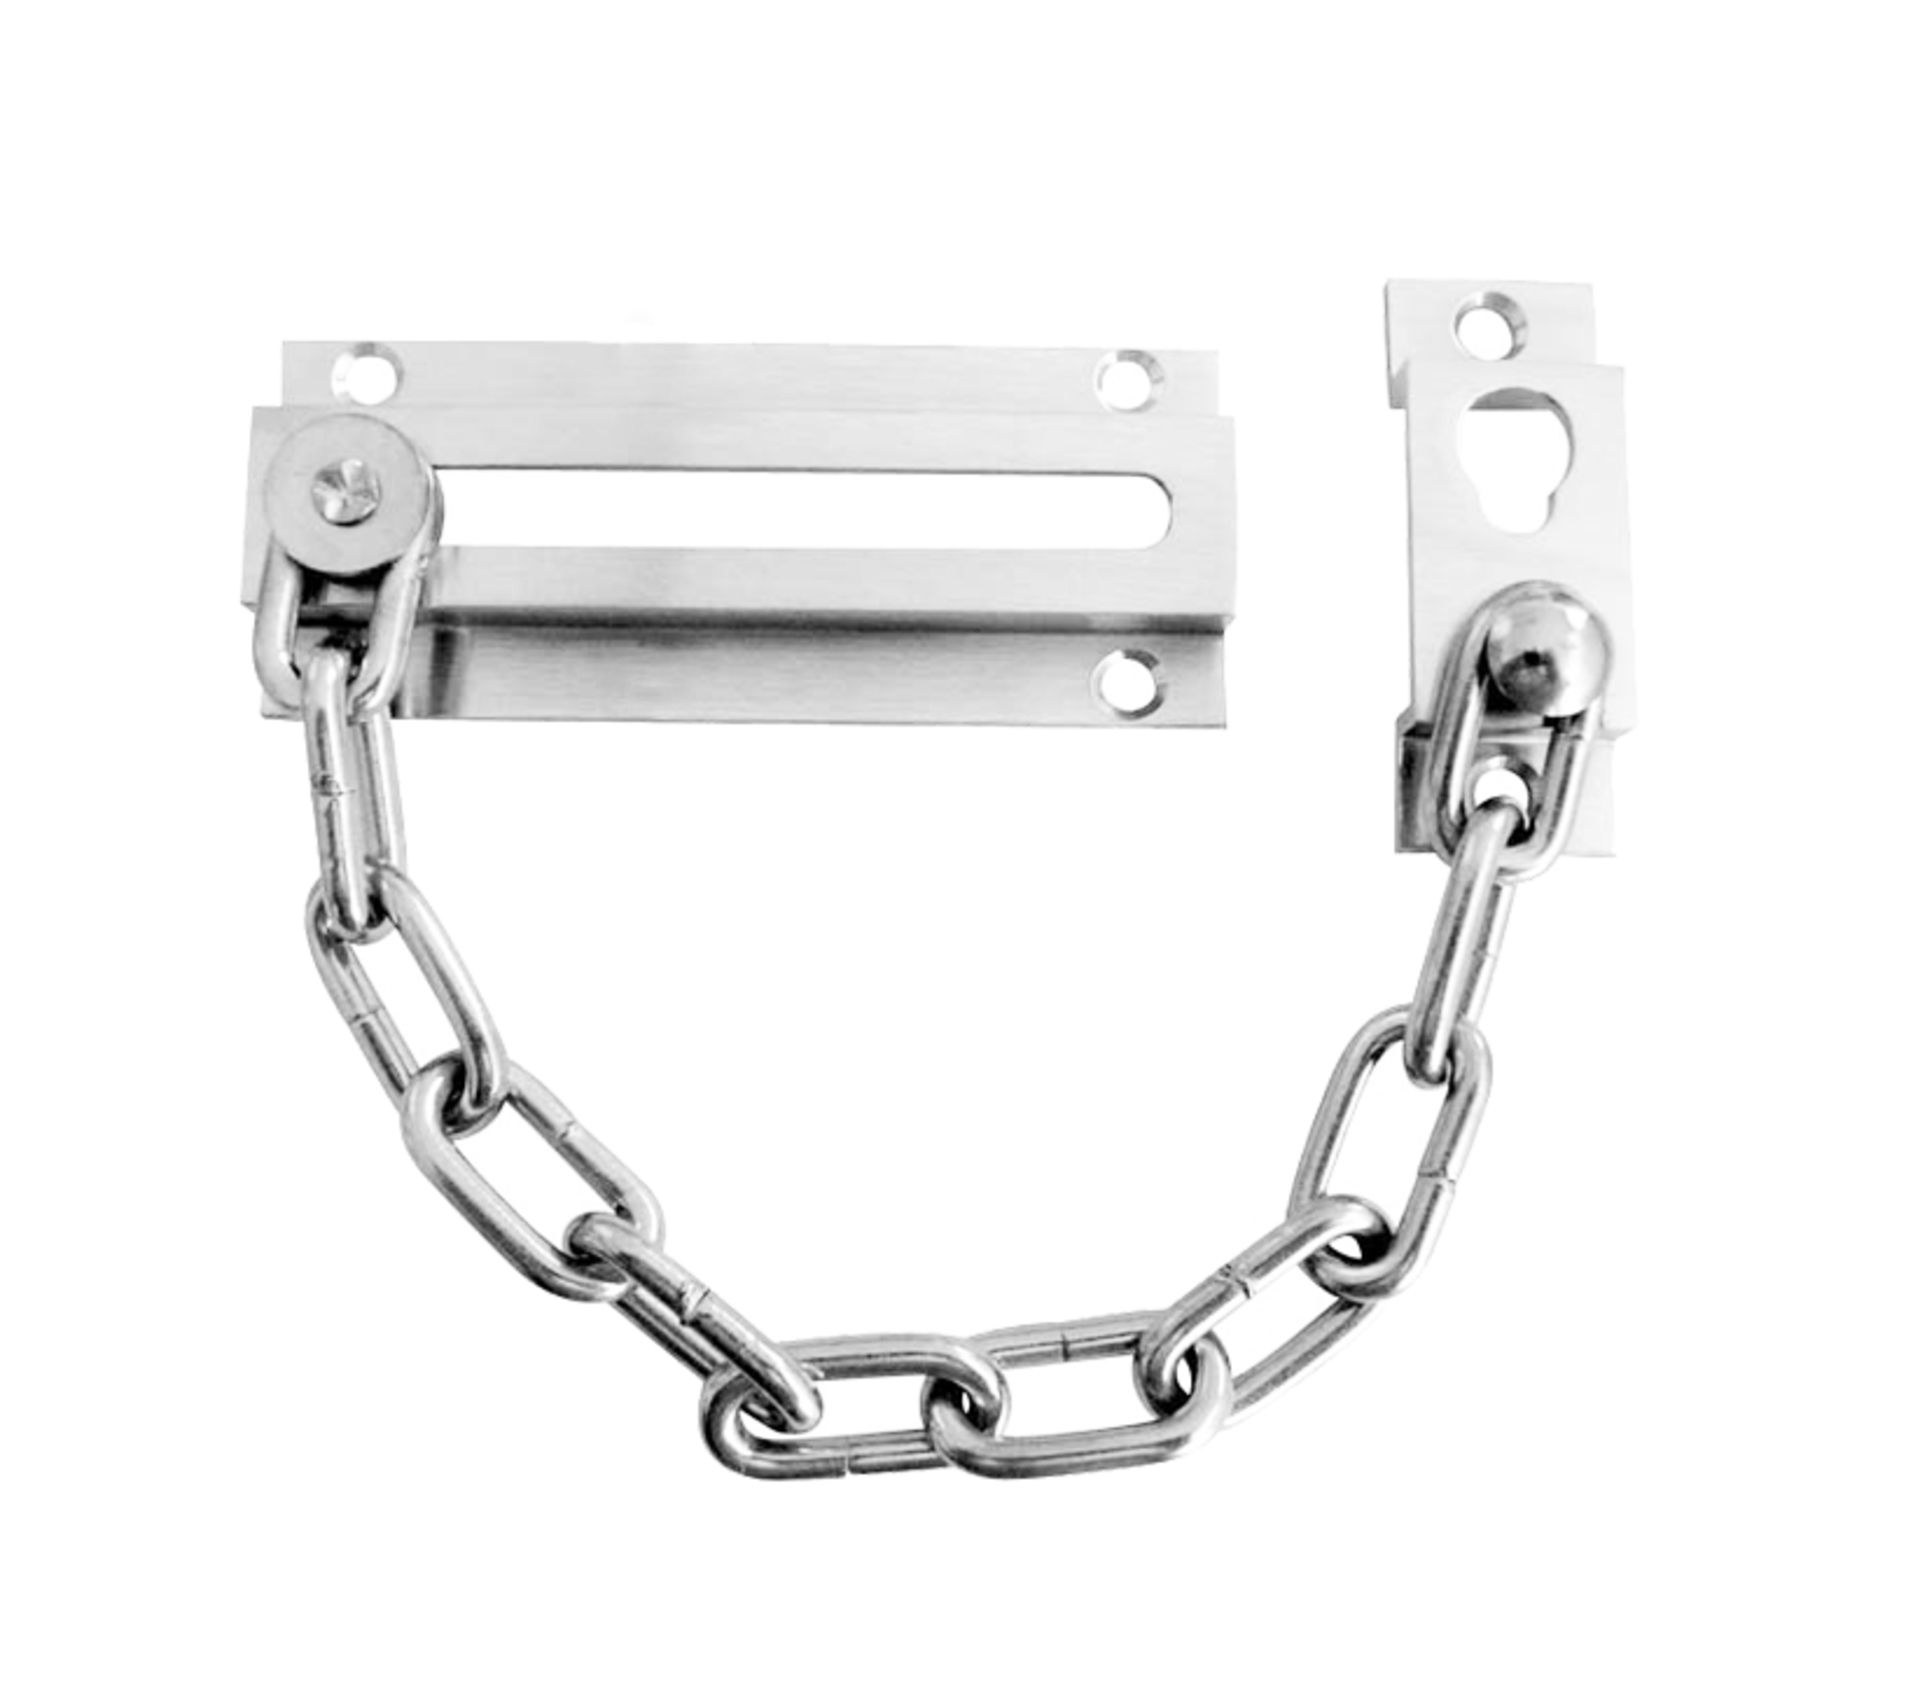 Approximately 40 x Brass Security Door Chains - Brand New Stock - Product Code: J3001SC / PC - CL538